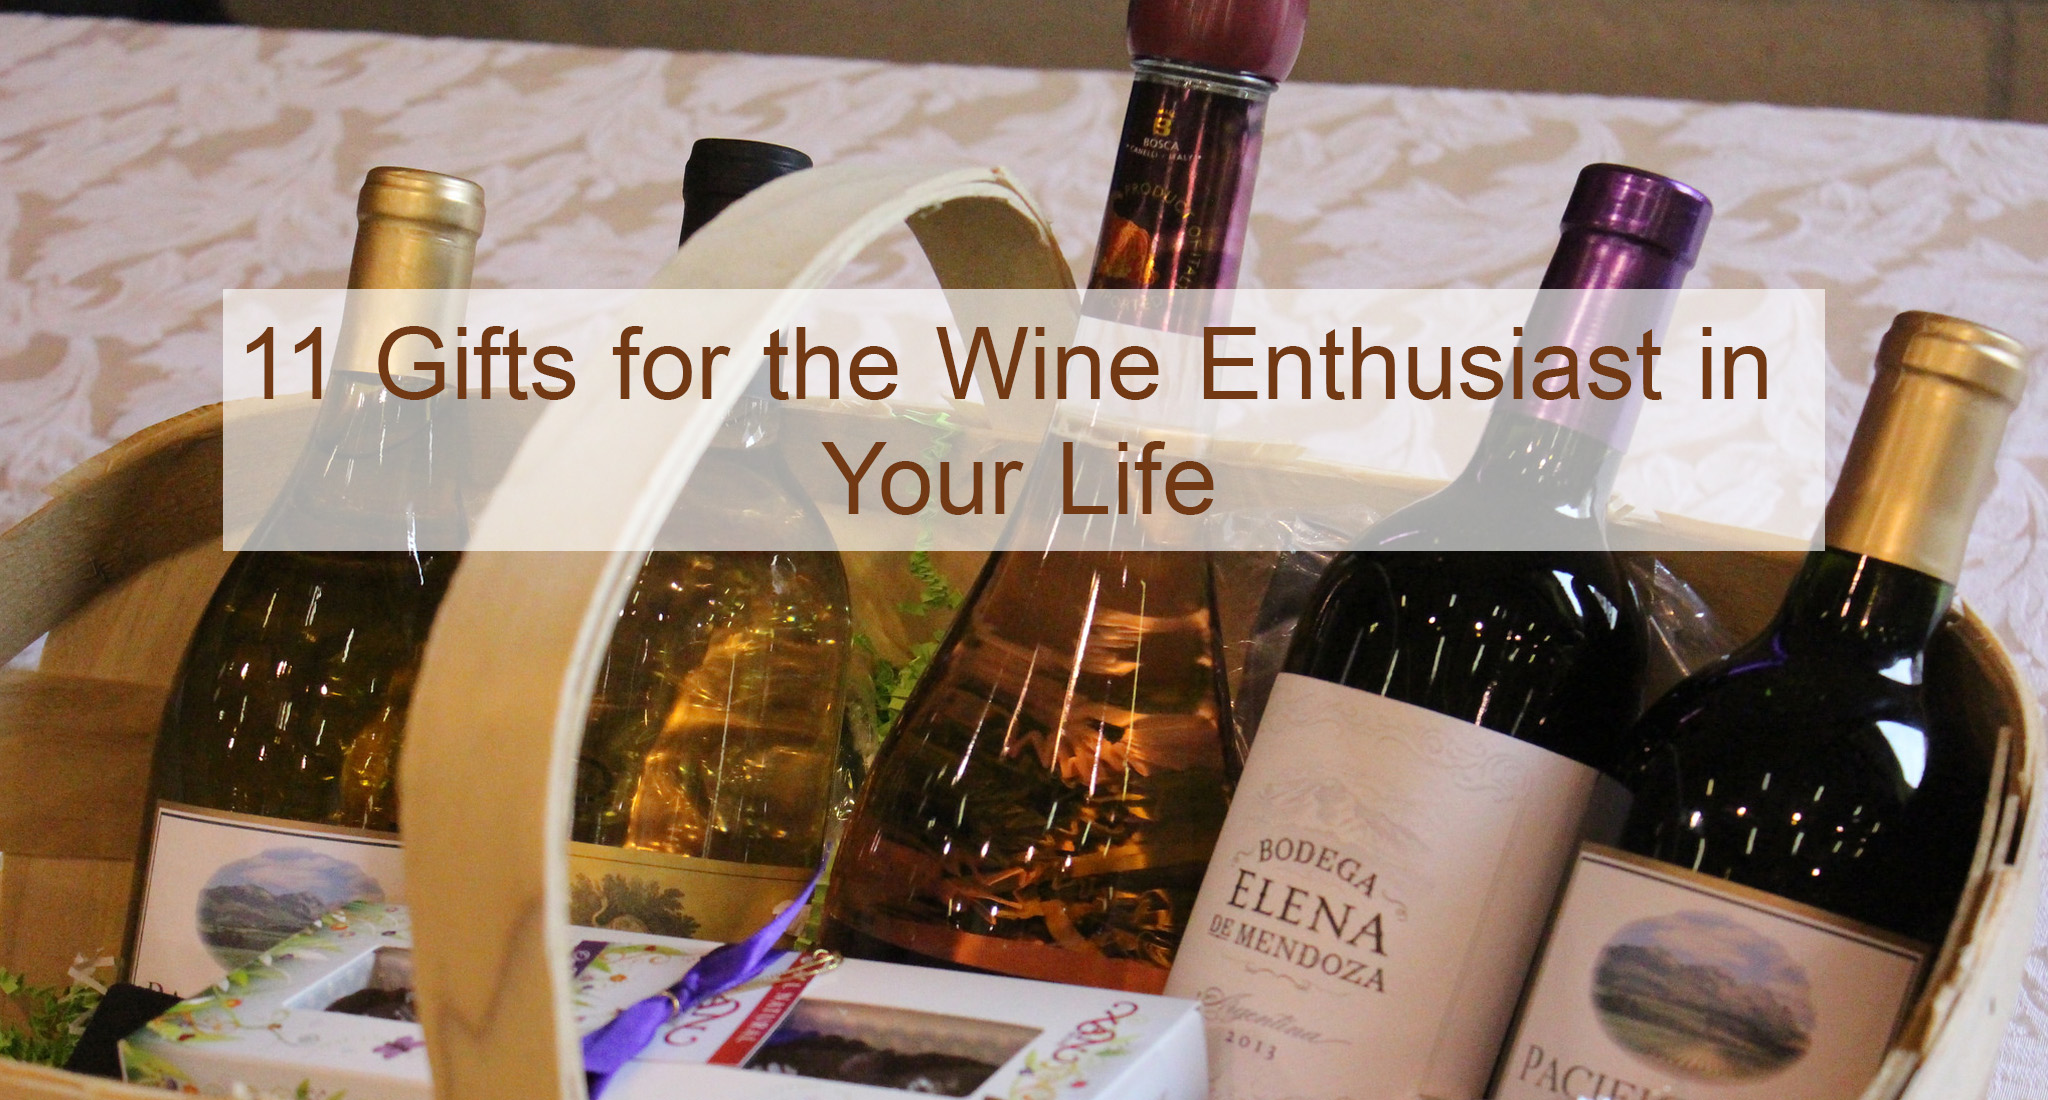 11 Gifts for the Wine Enthusiast in Your Life